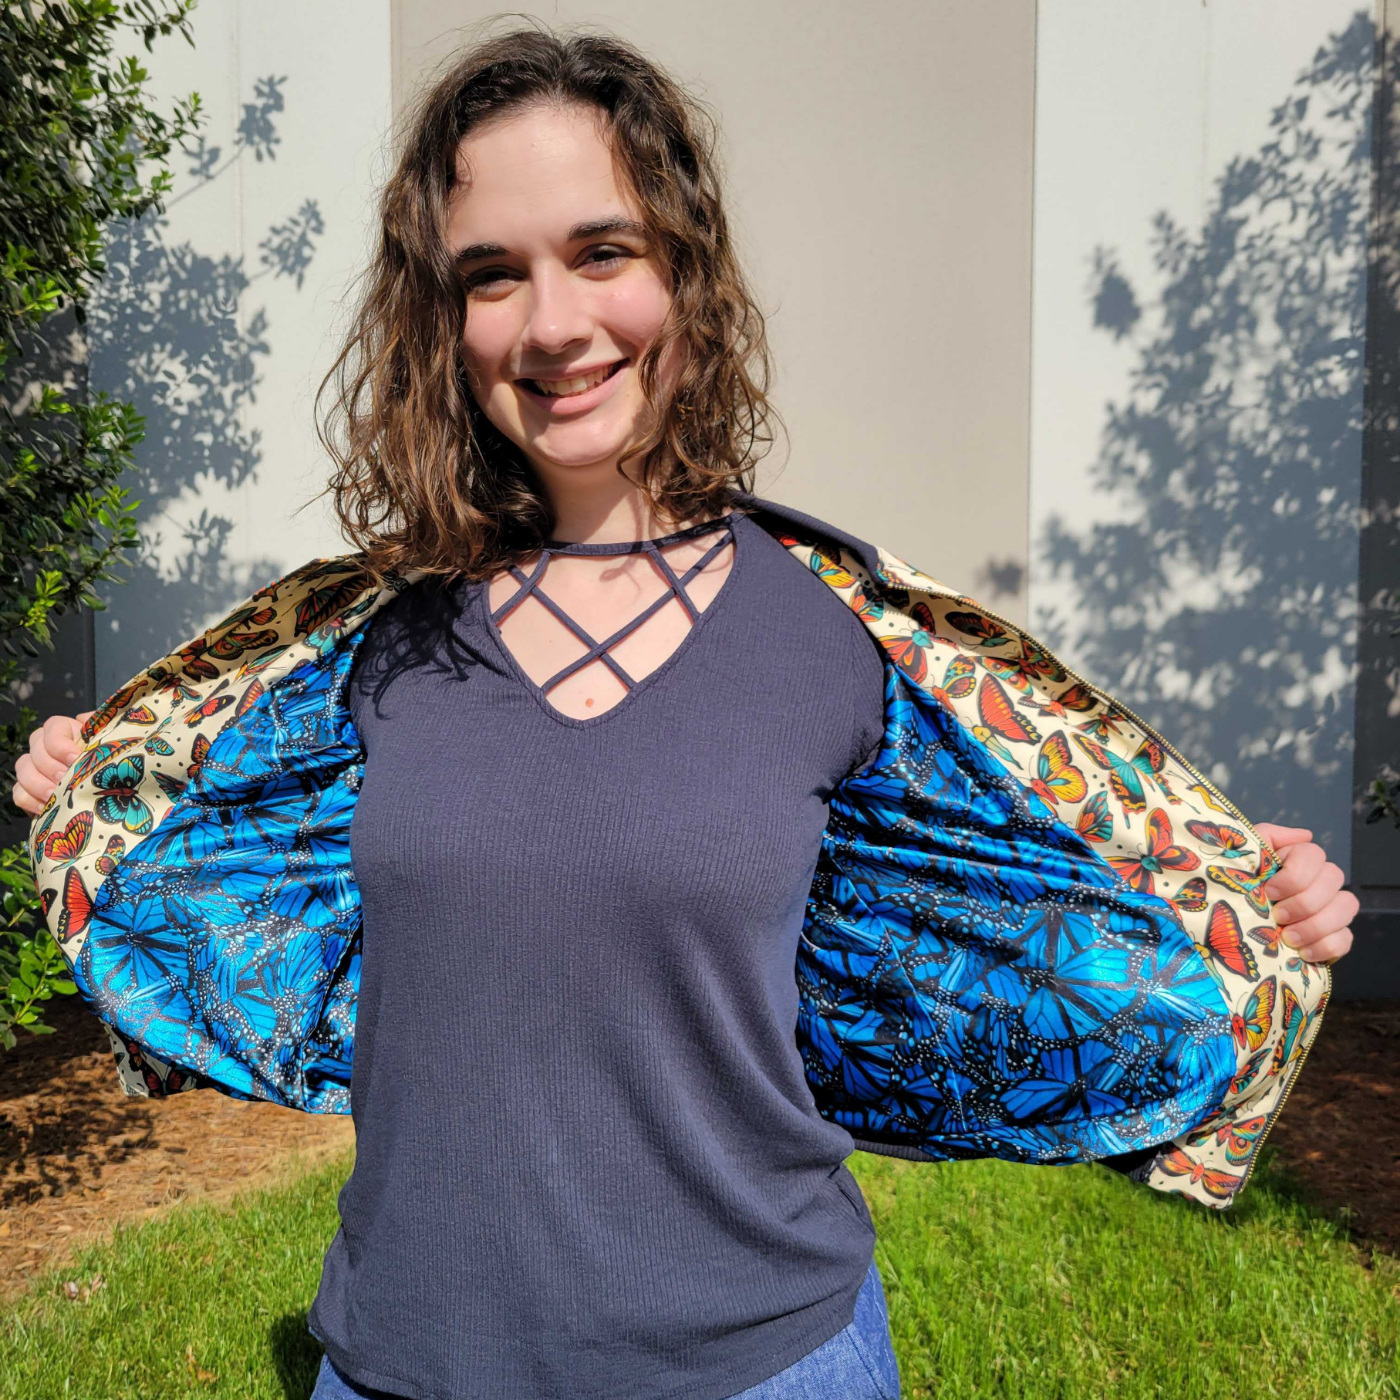 Sydney is wearing jean shorts, a black shirt and jacket with black cuffs and an orange, red and green butterfly design with a cream background. The middle sections of the butterflies are the lower half of human bodies as seen from behind. She is holding the jacket open to show a lining featuring a design filled with blue butterflies.